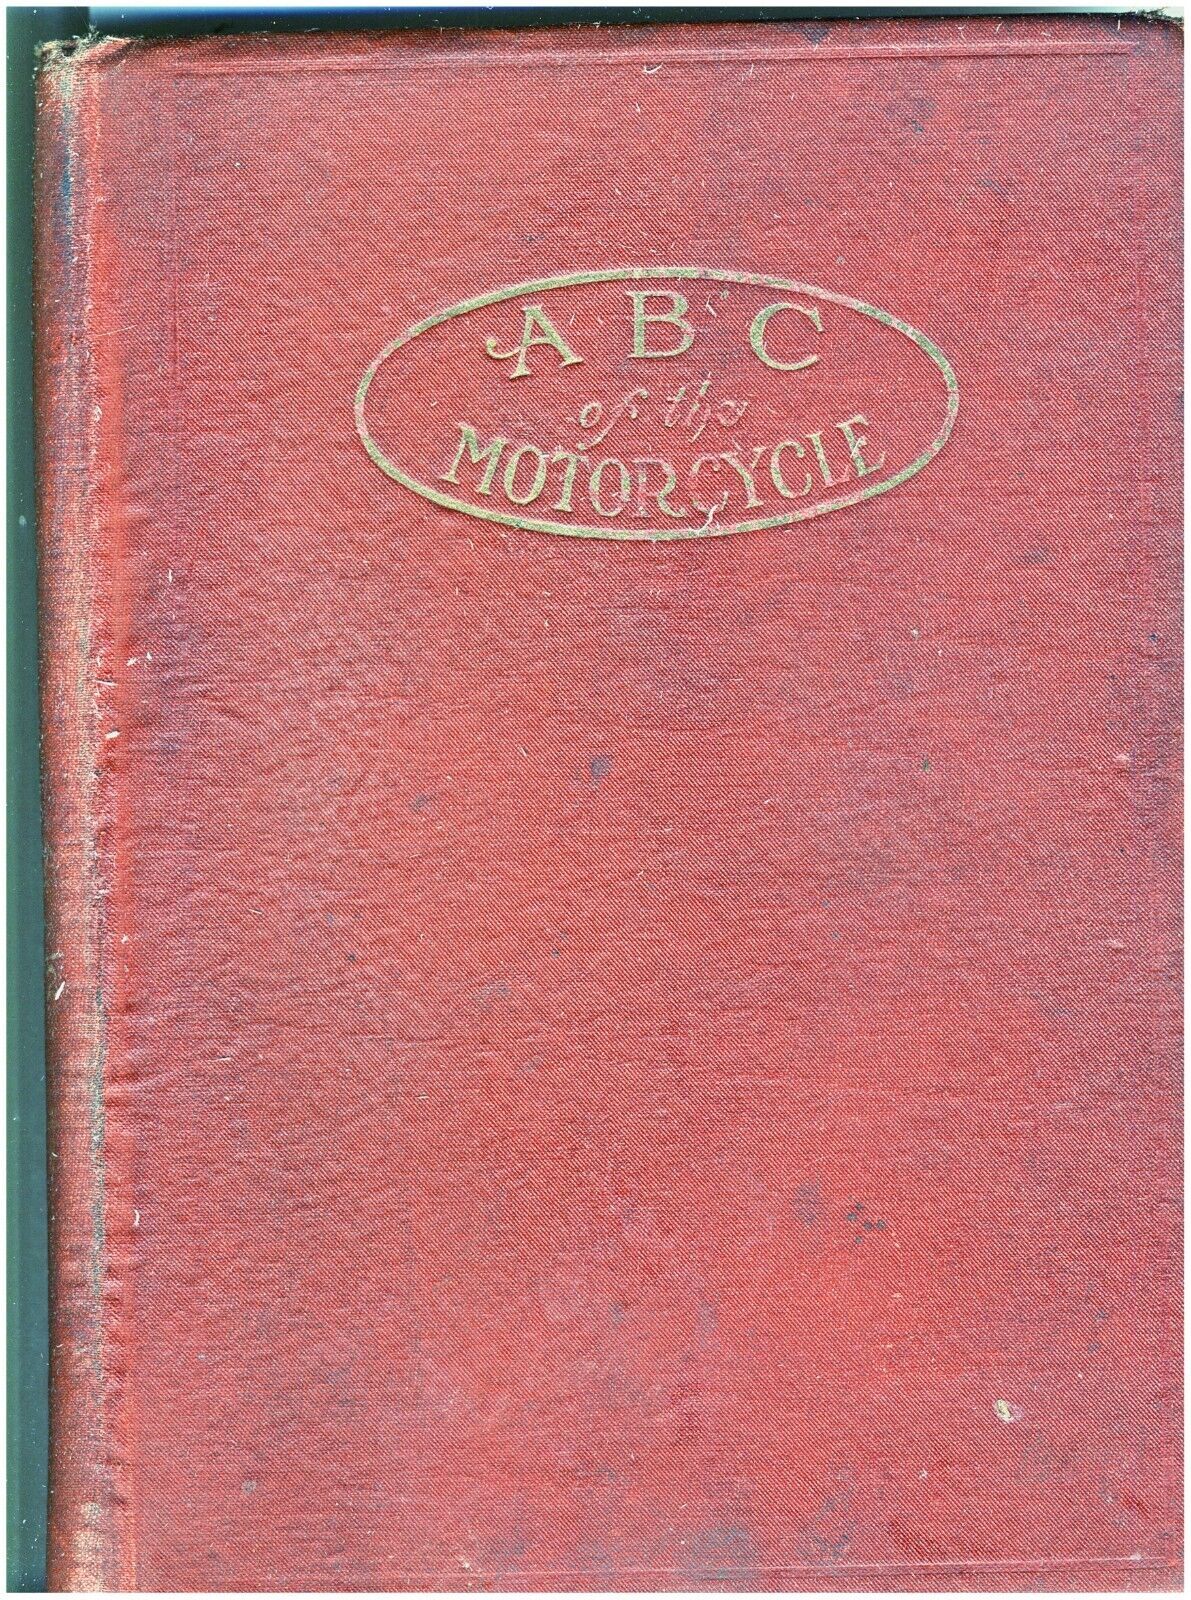 The ABC of the Motorcycle Hard Cover Book 223-Pages First Print 1910 Good Cond.